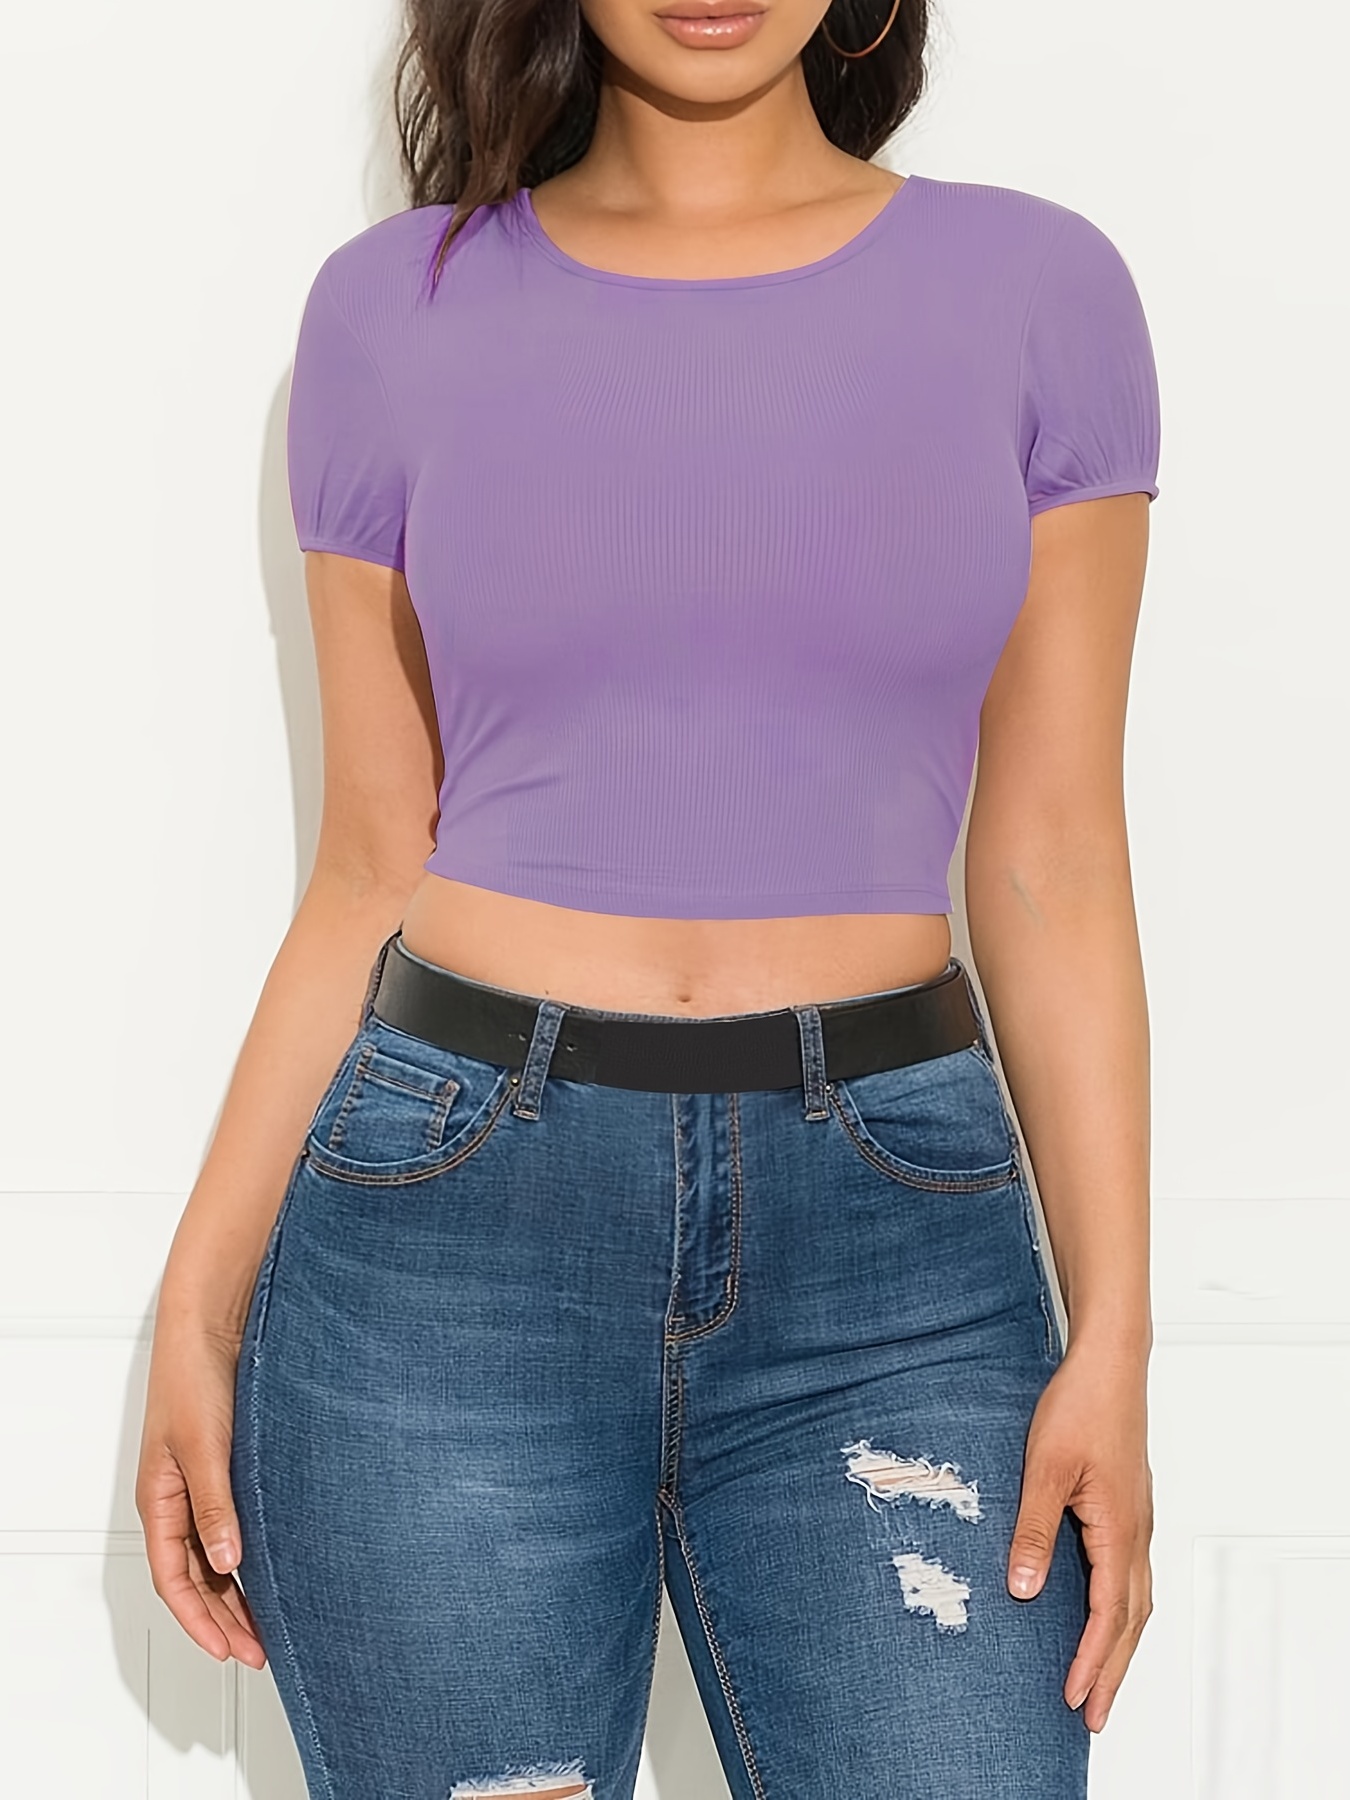 Basic Backless T-Shirt Top  Backless crop top, Backless top, Tops